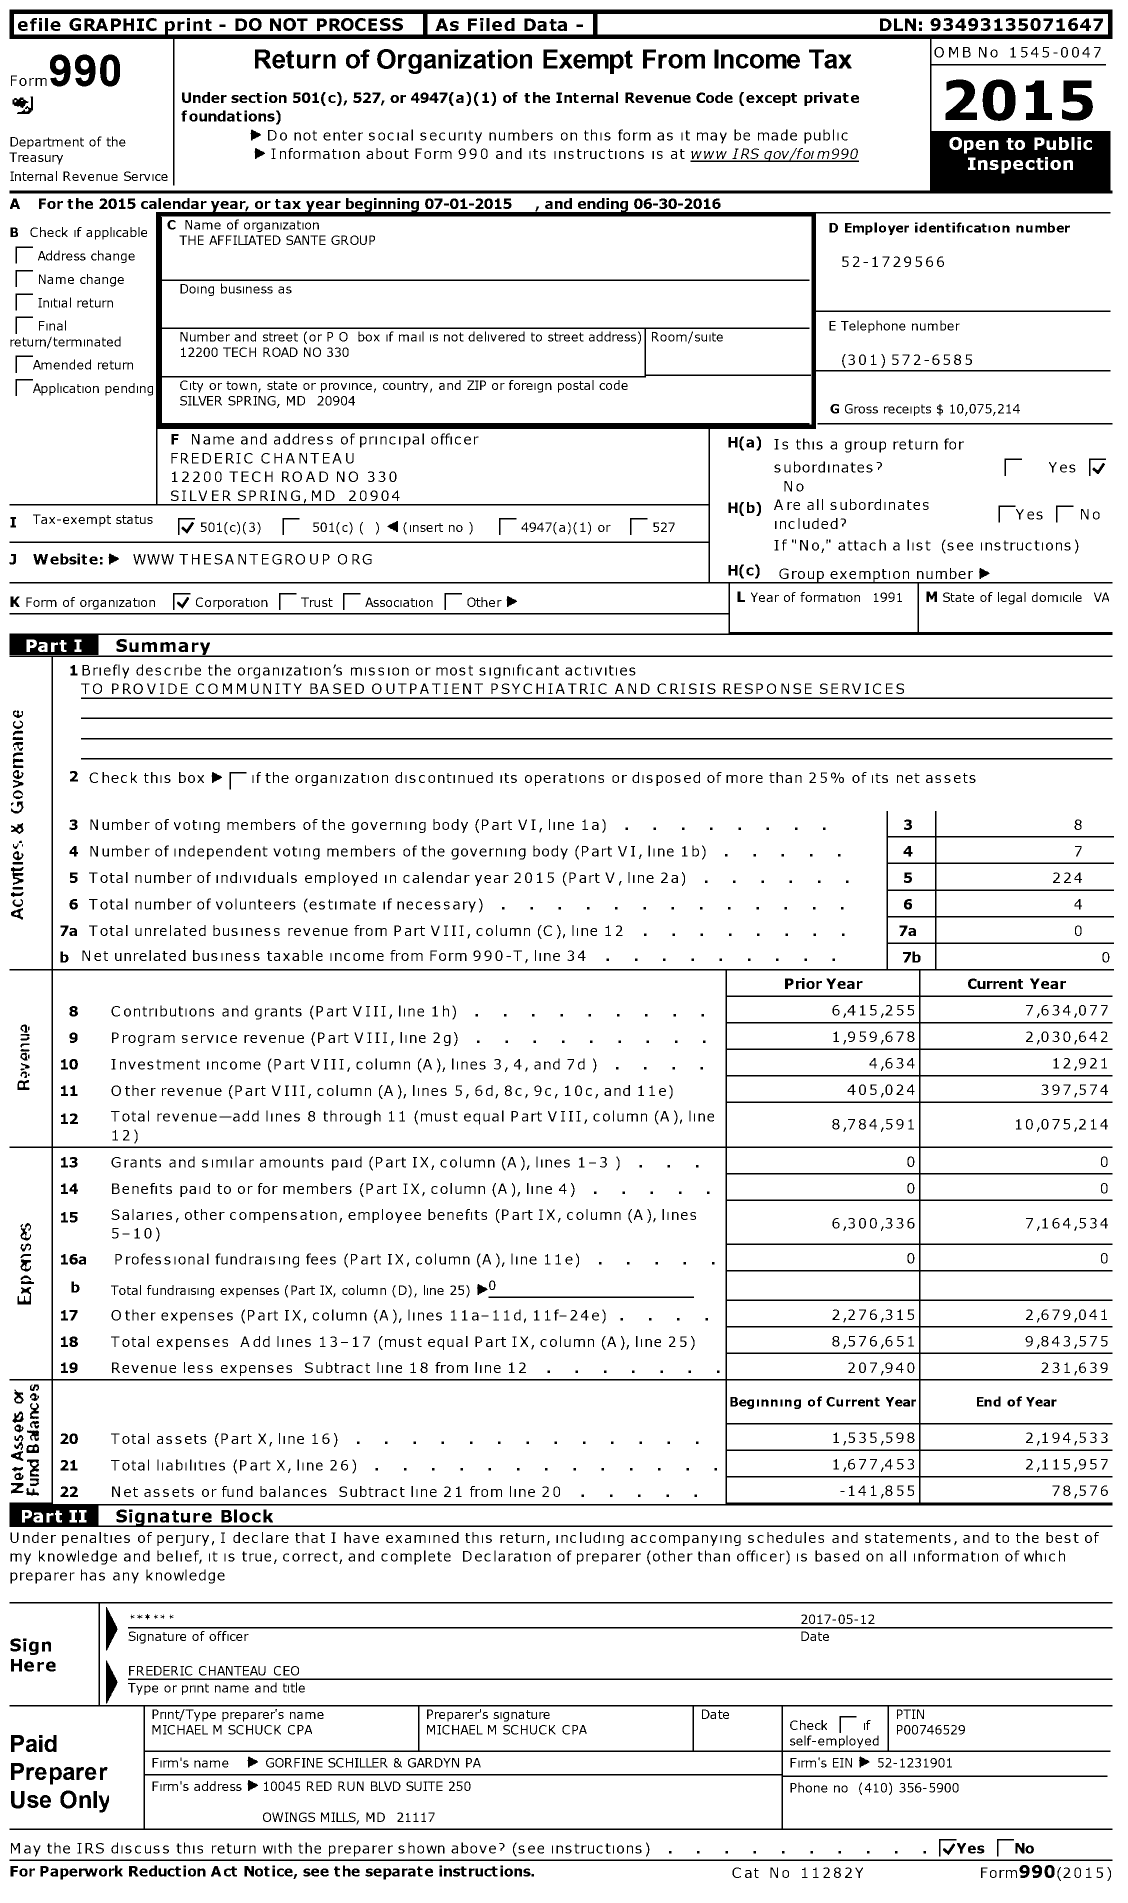 Image of first page of 2015 Form 990 for Affiliated Sante Group